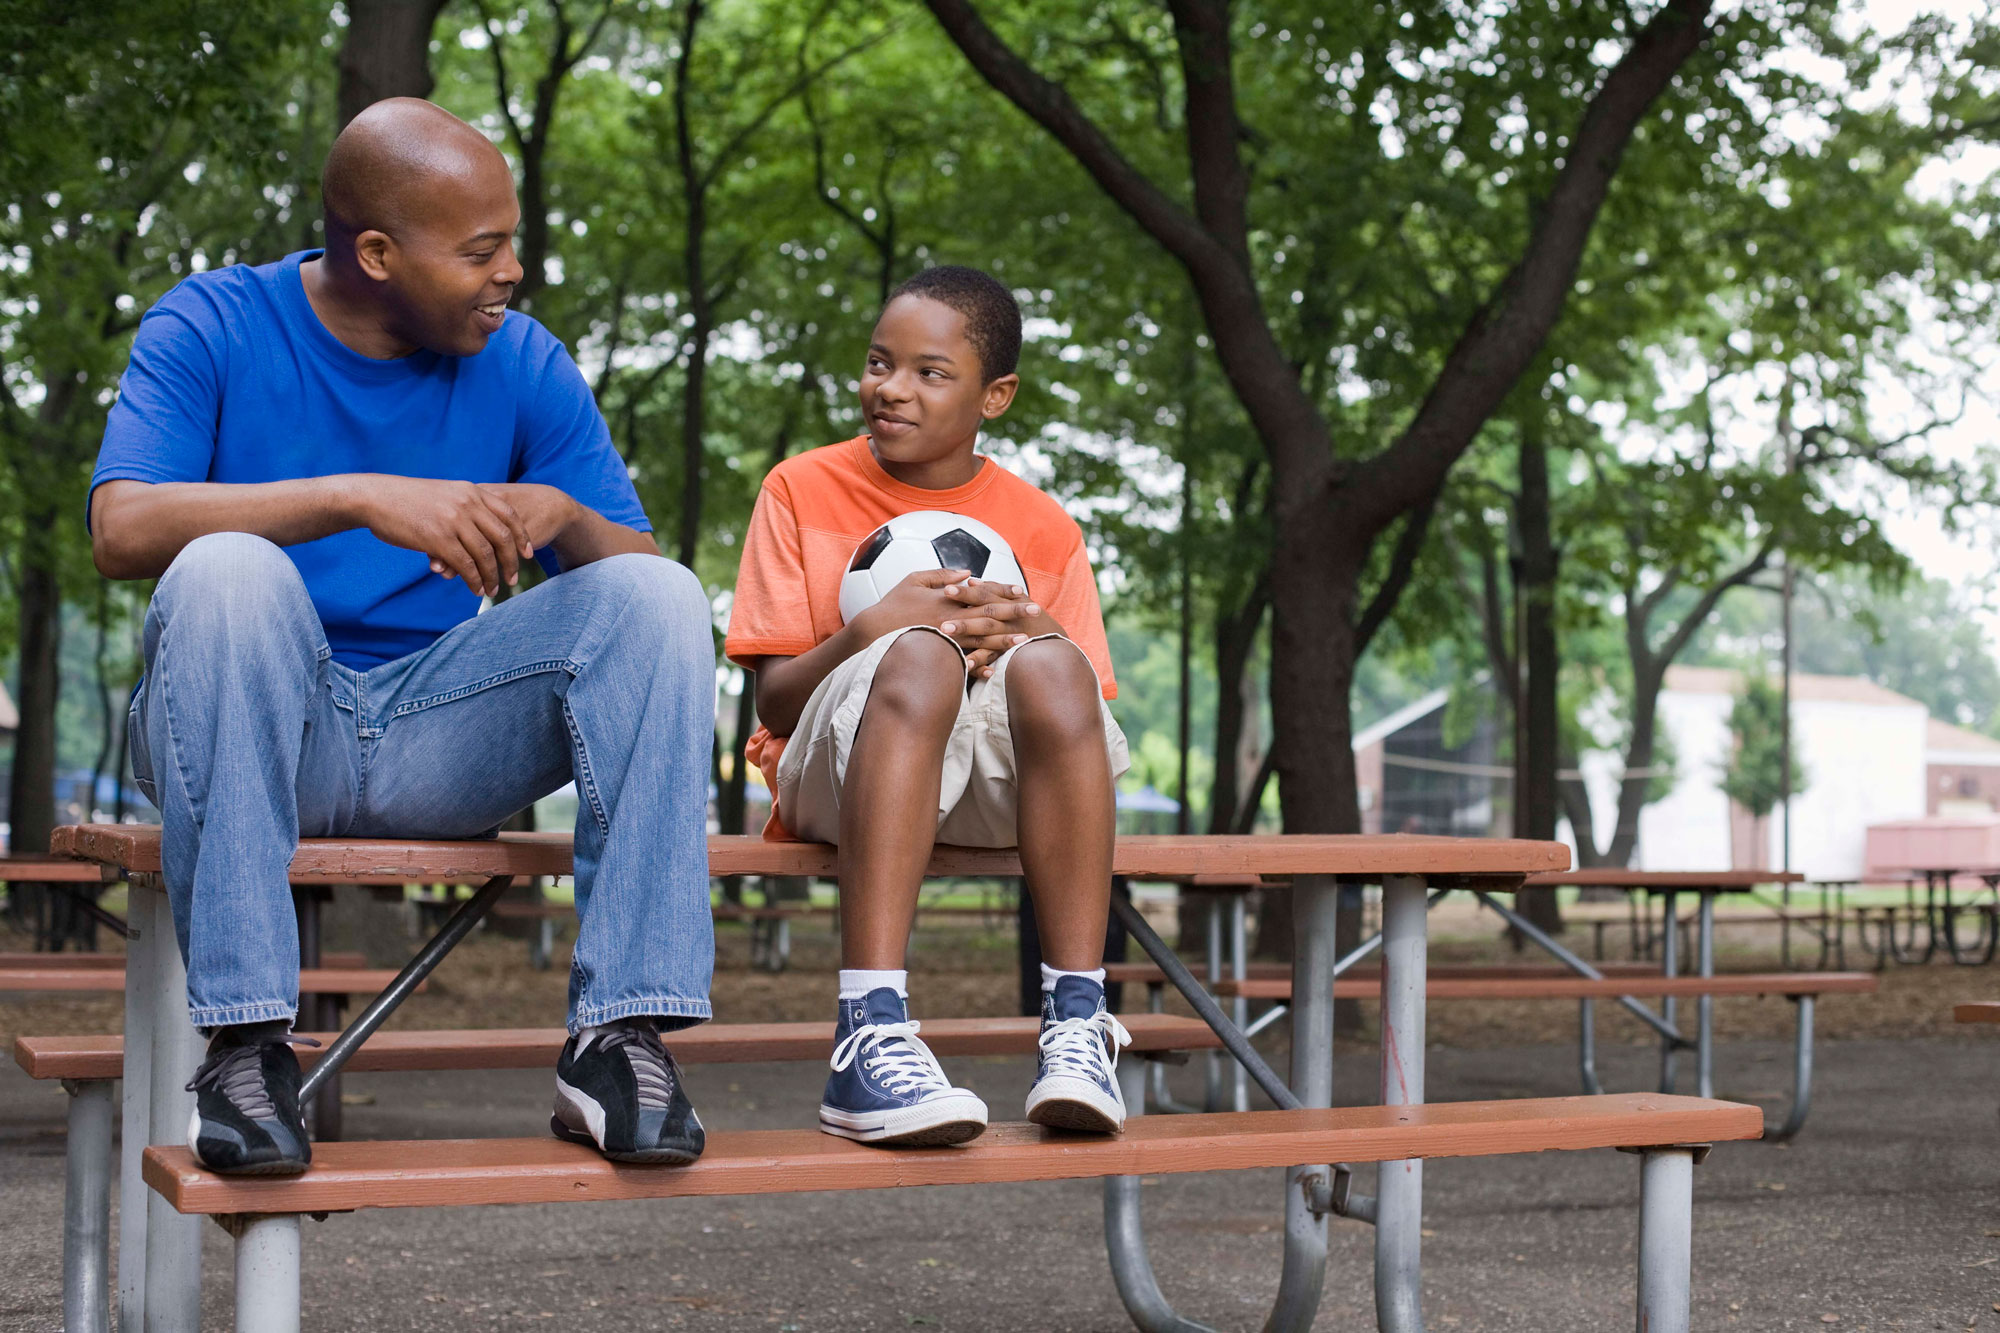 Man talking to younger child on picnic bench